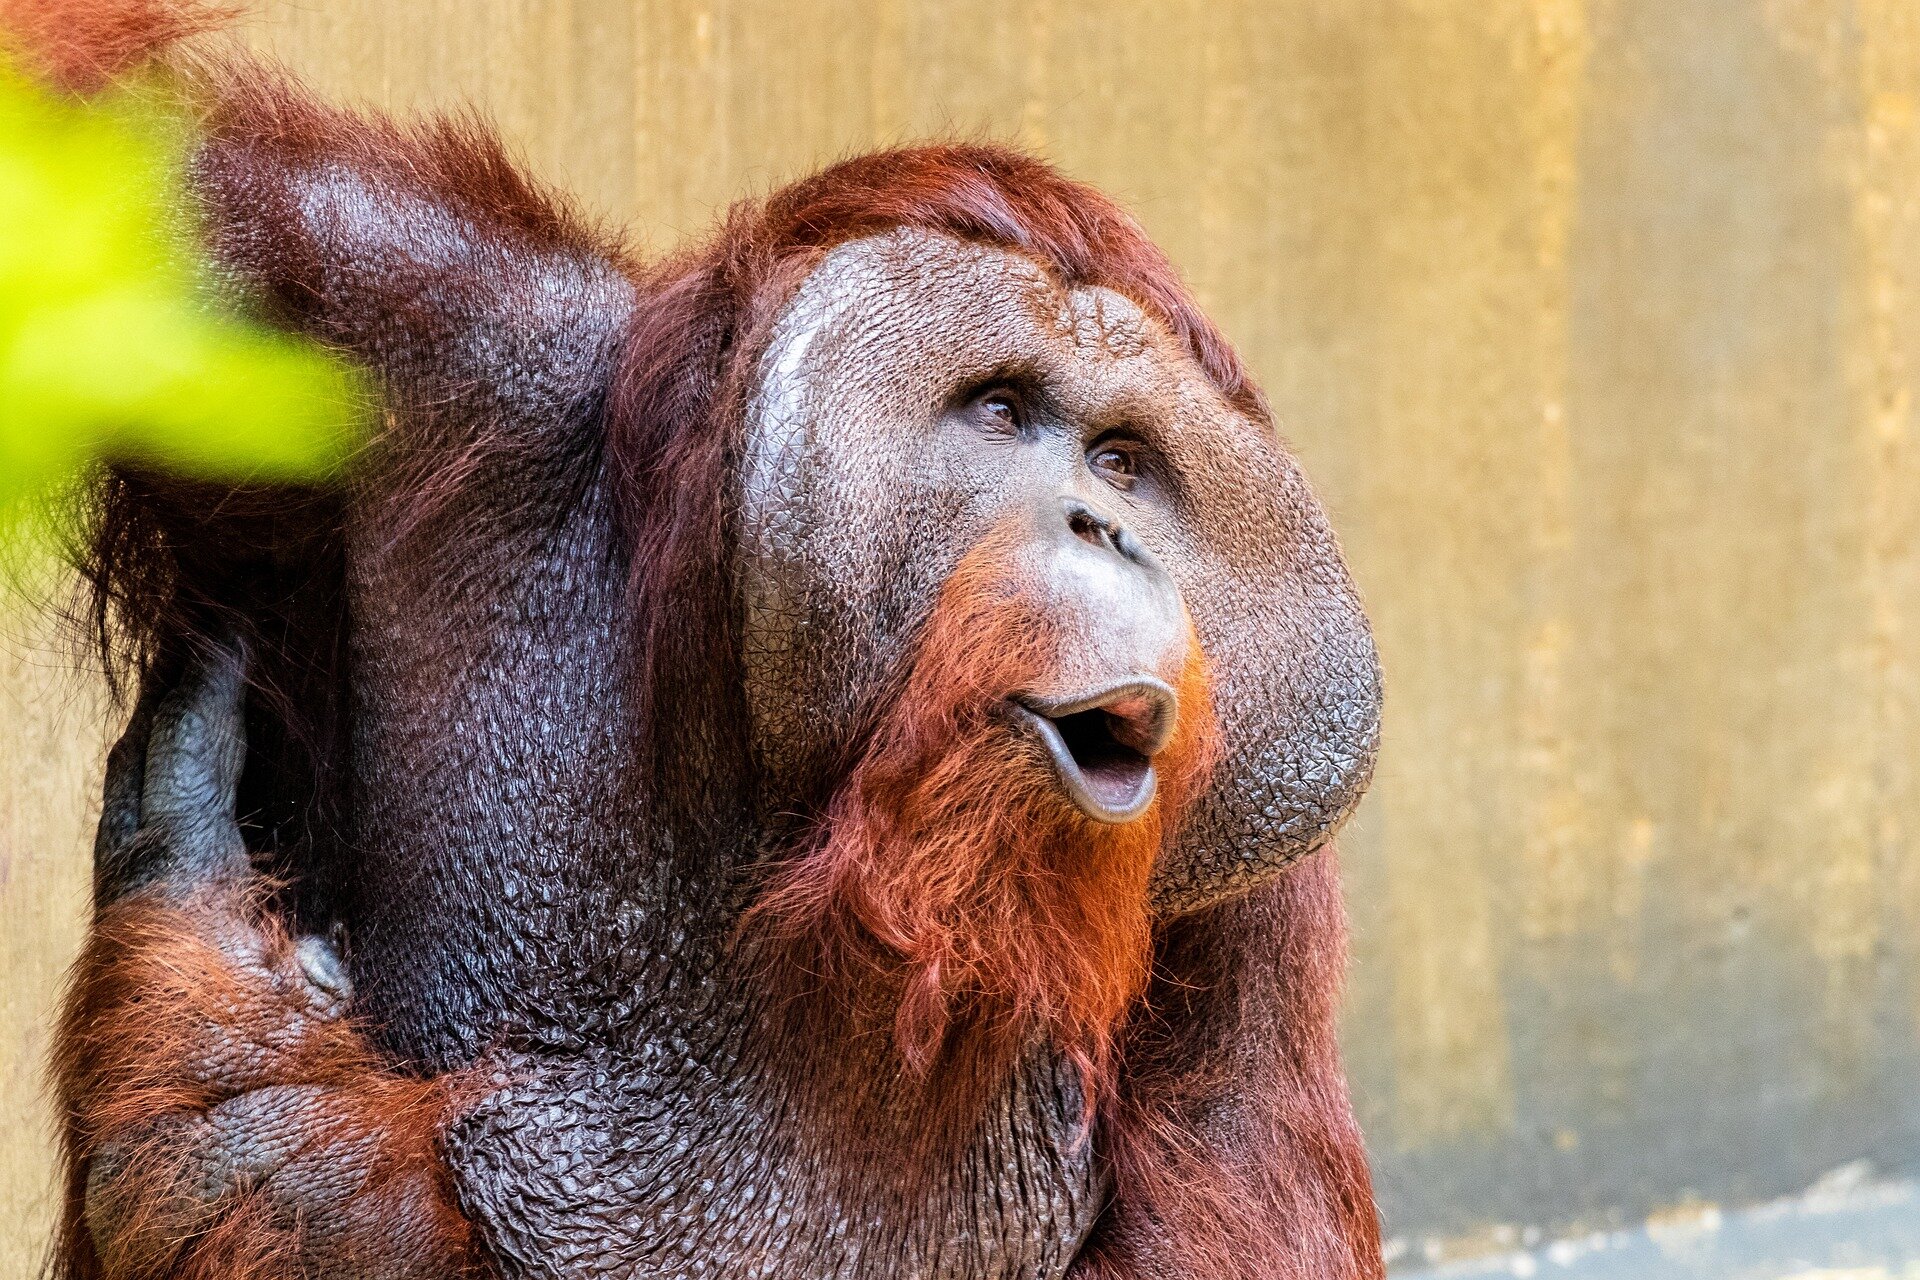 Study Finds Orangutans Able to Produce Dual Sounds Simultaneously, Comparing to Human Beatboxing